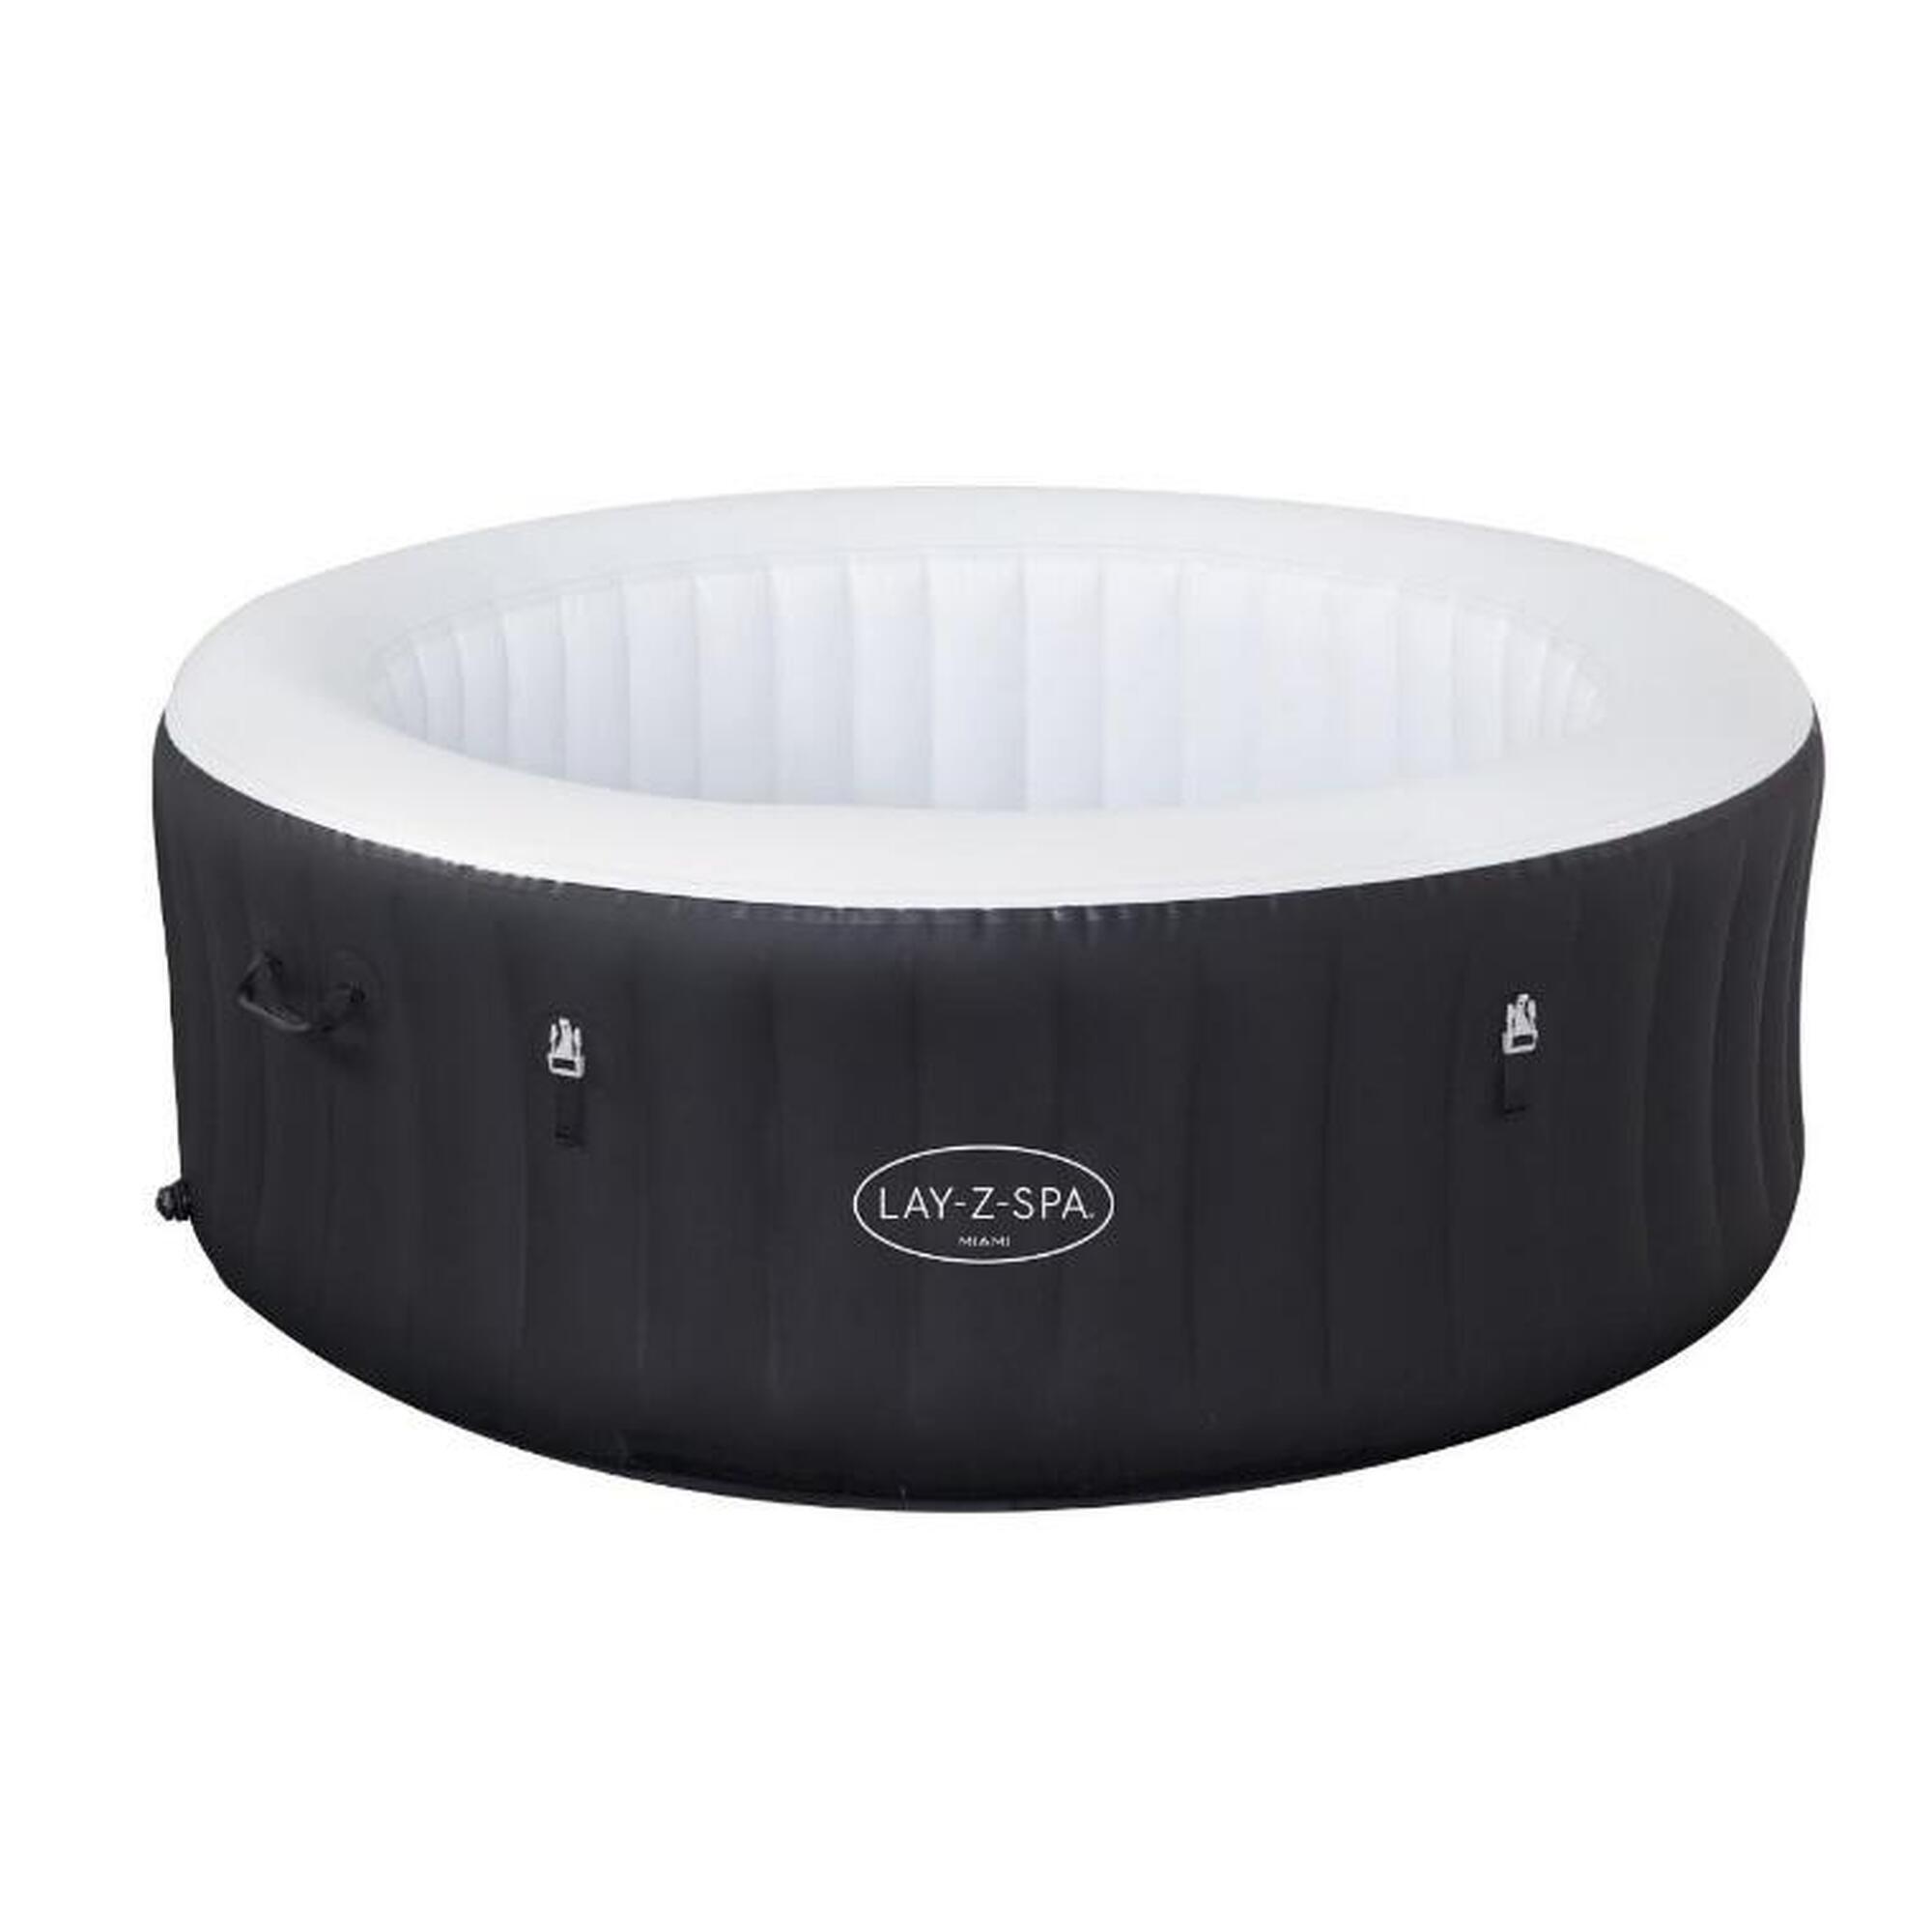 Lay-Z-Spa Lay-Z-Spa Inflatable Lining For Miami Hot Tub